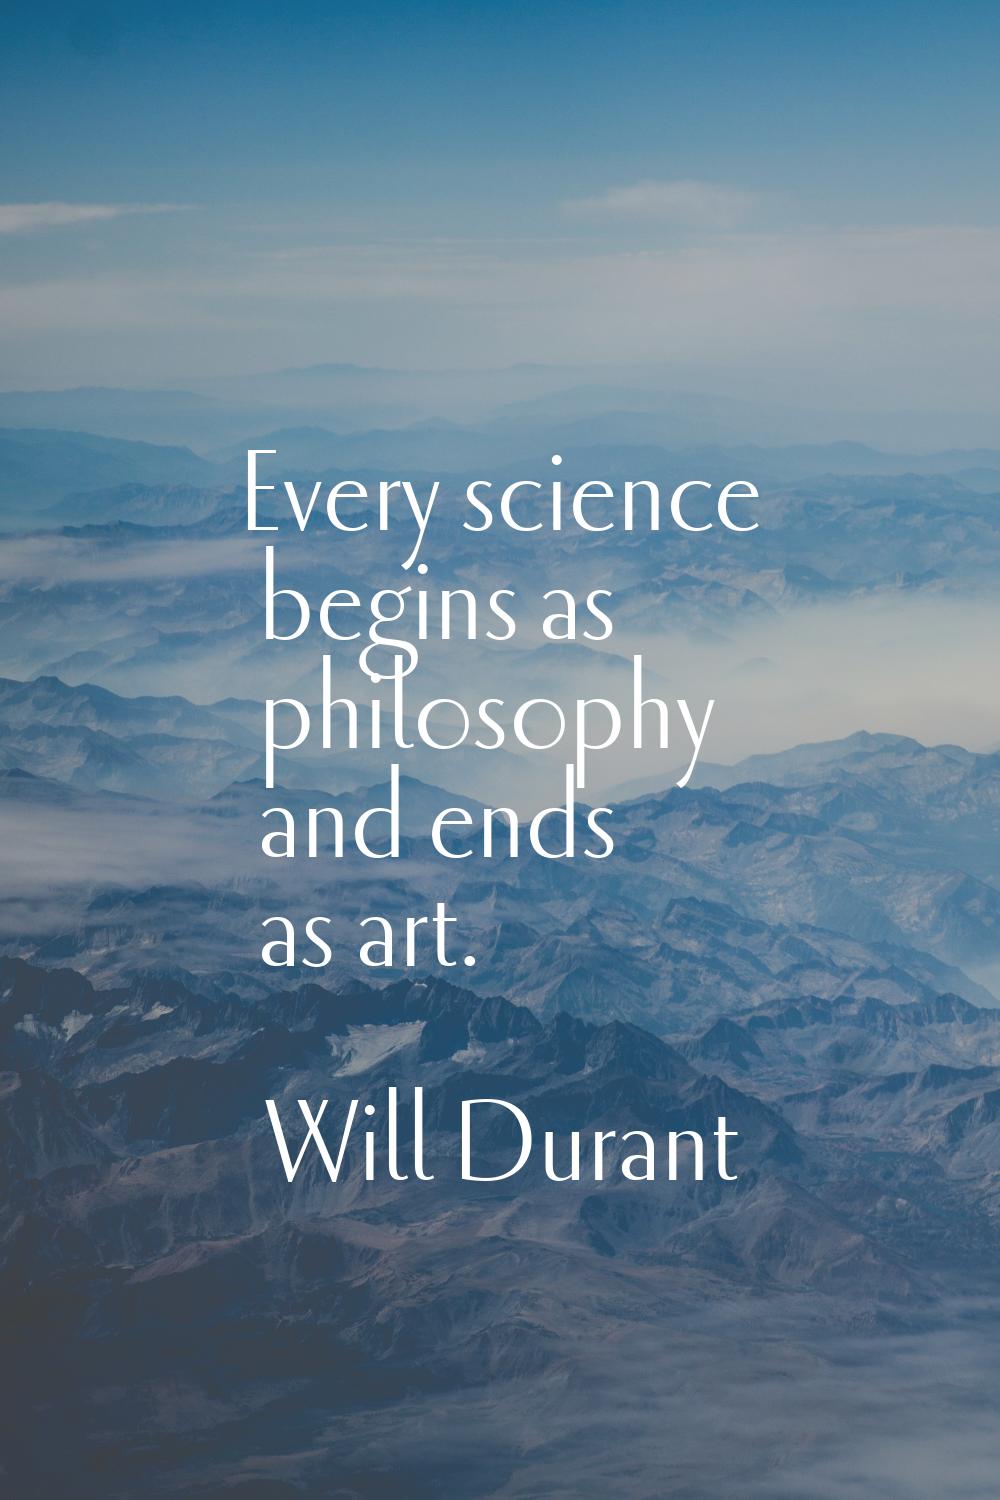 Every science begins as philosophy and ends as art.